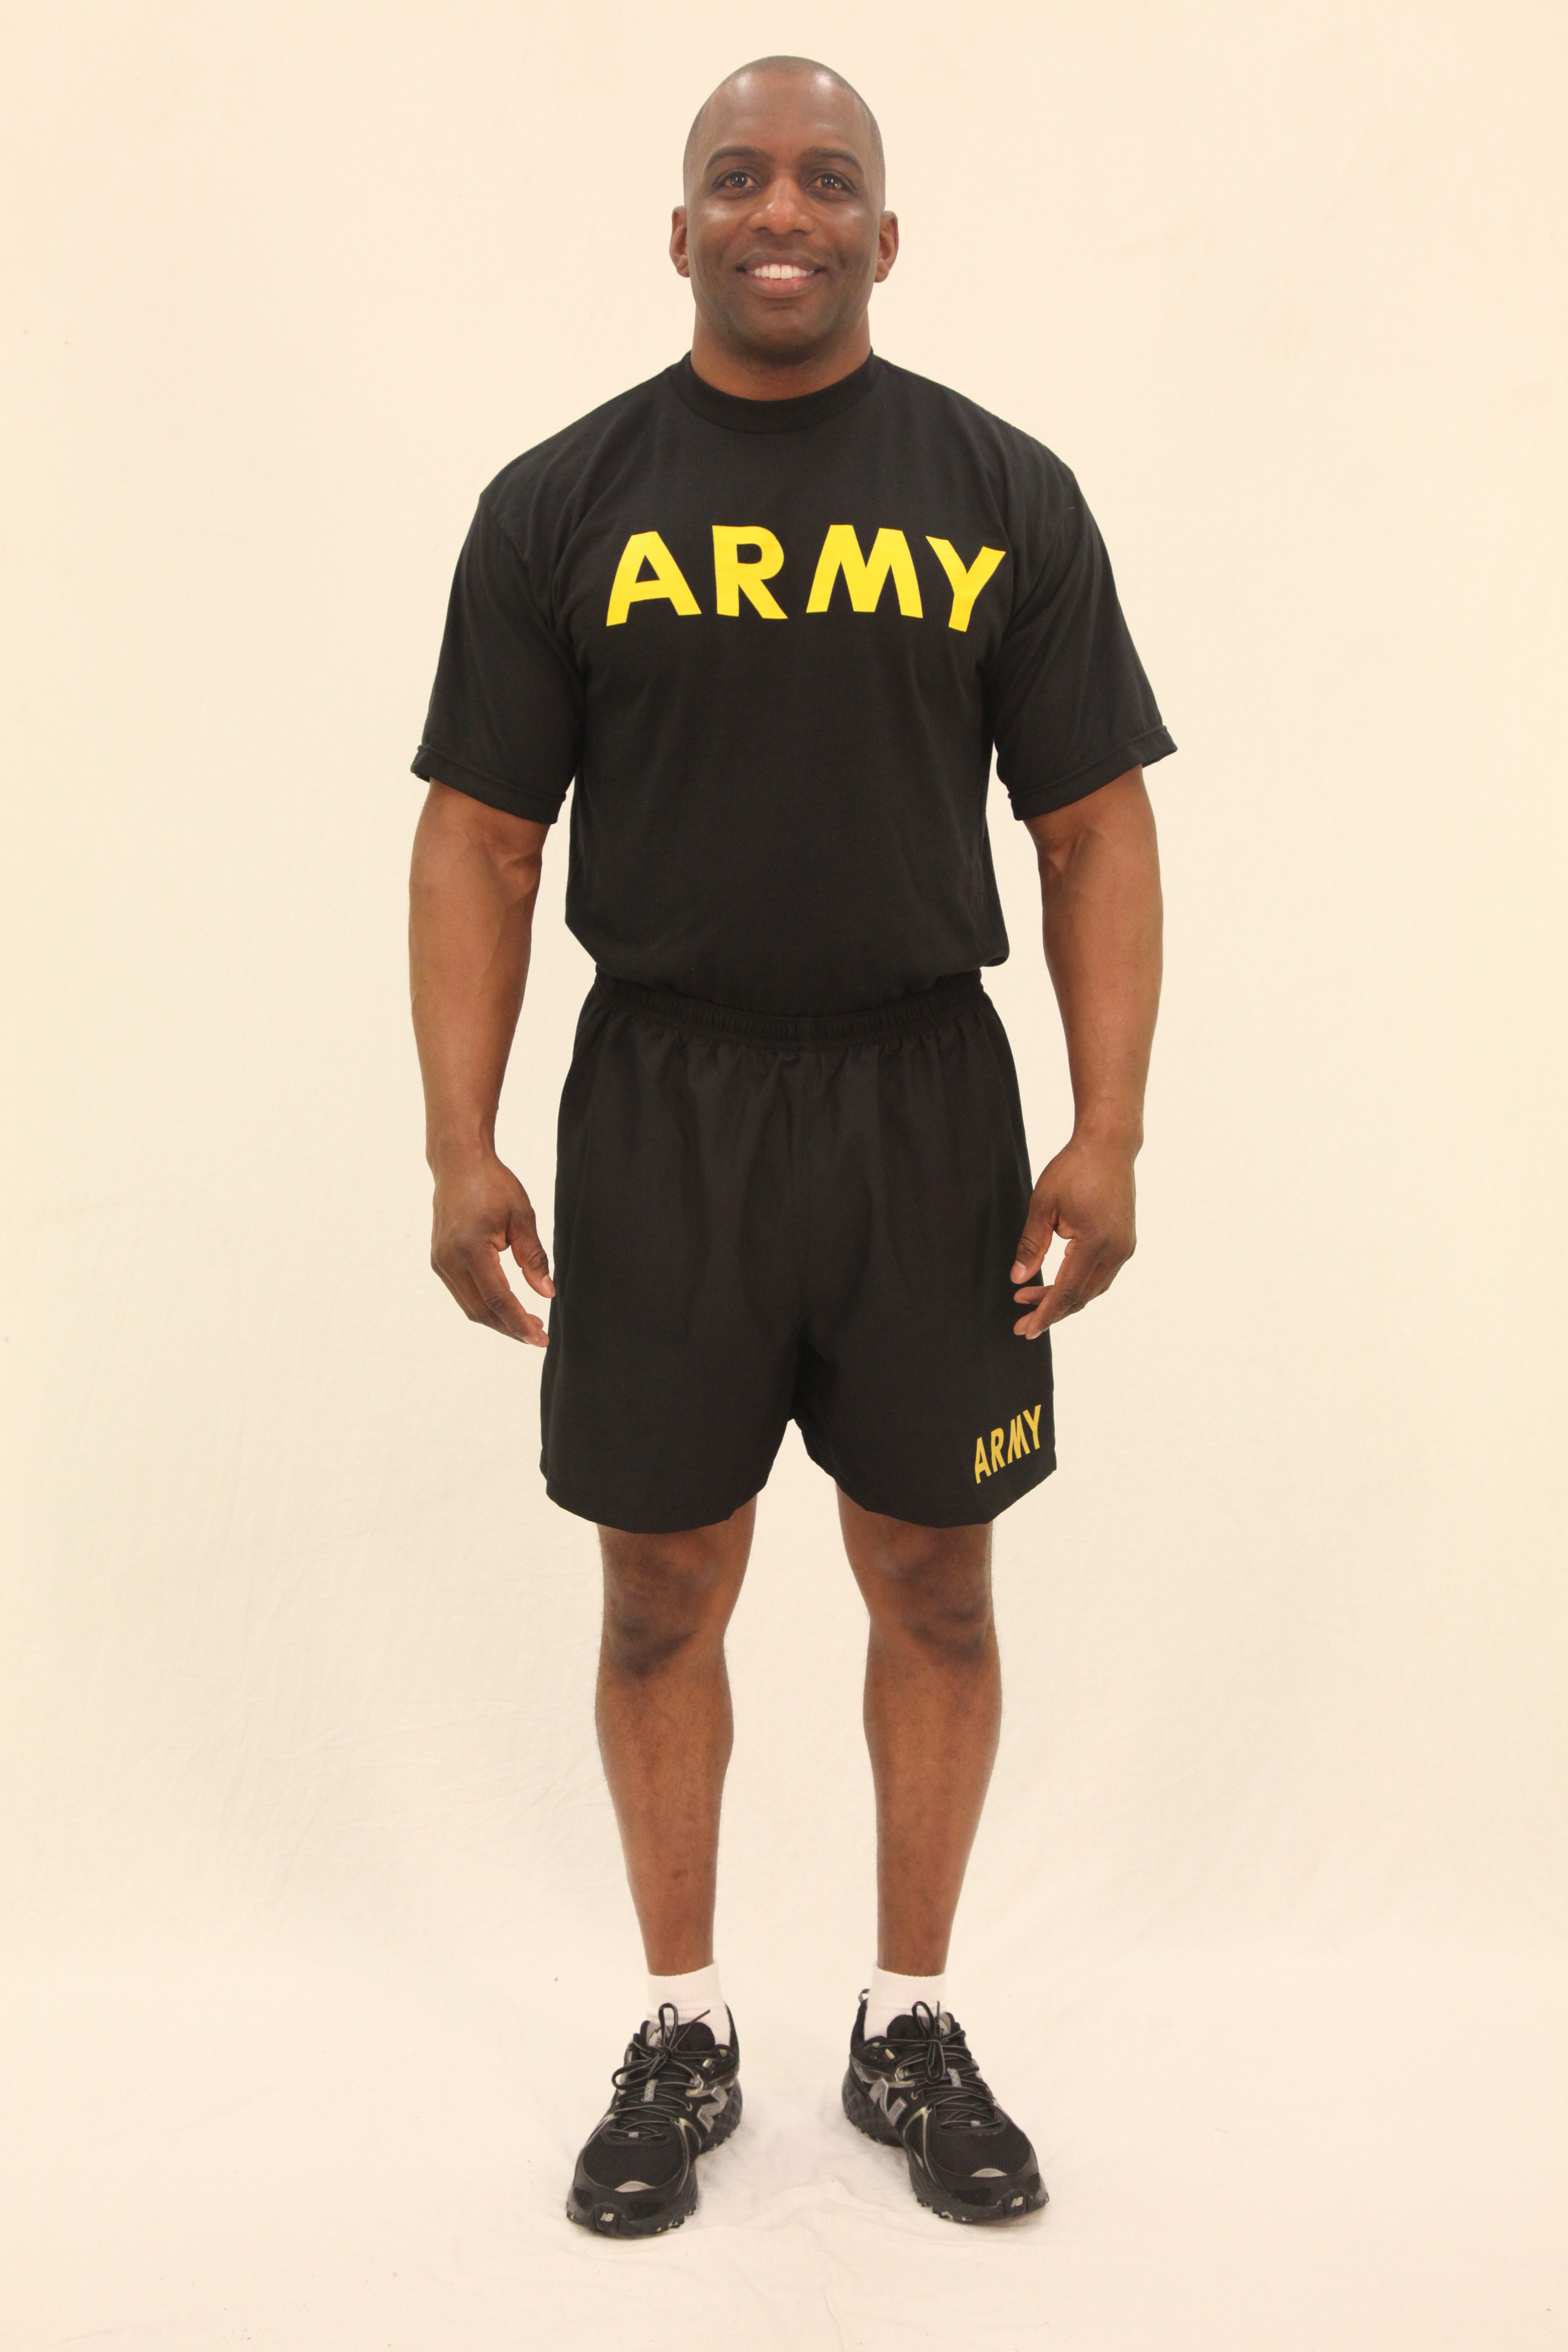 New Army PT uniforms result of Soldier feedback Article The United